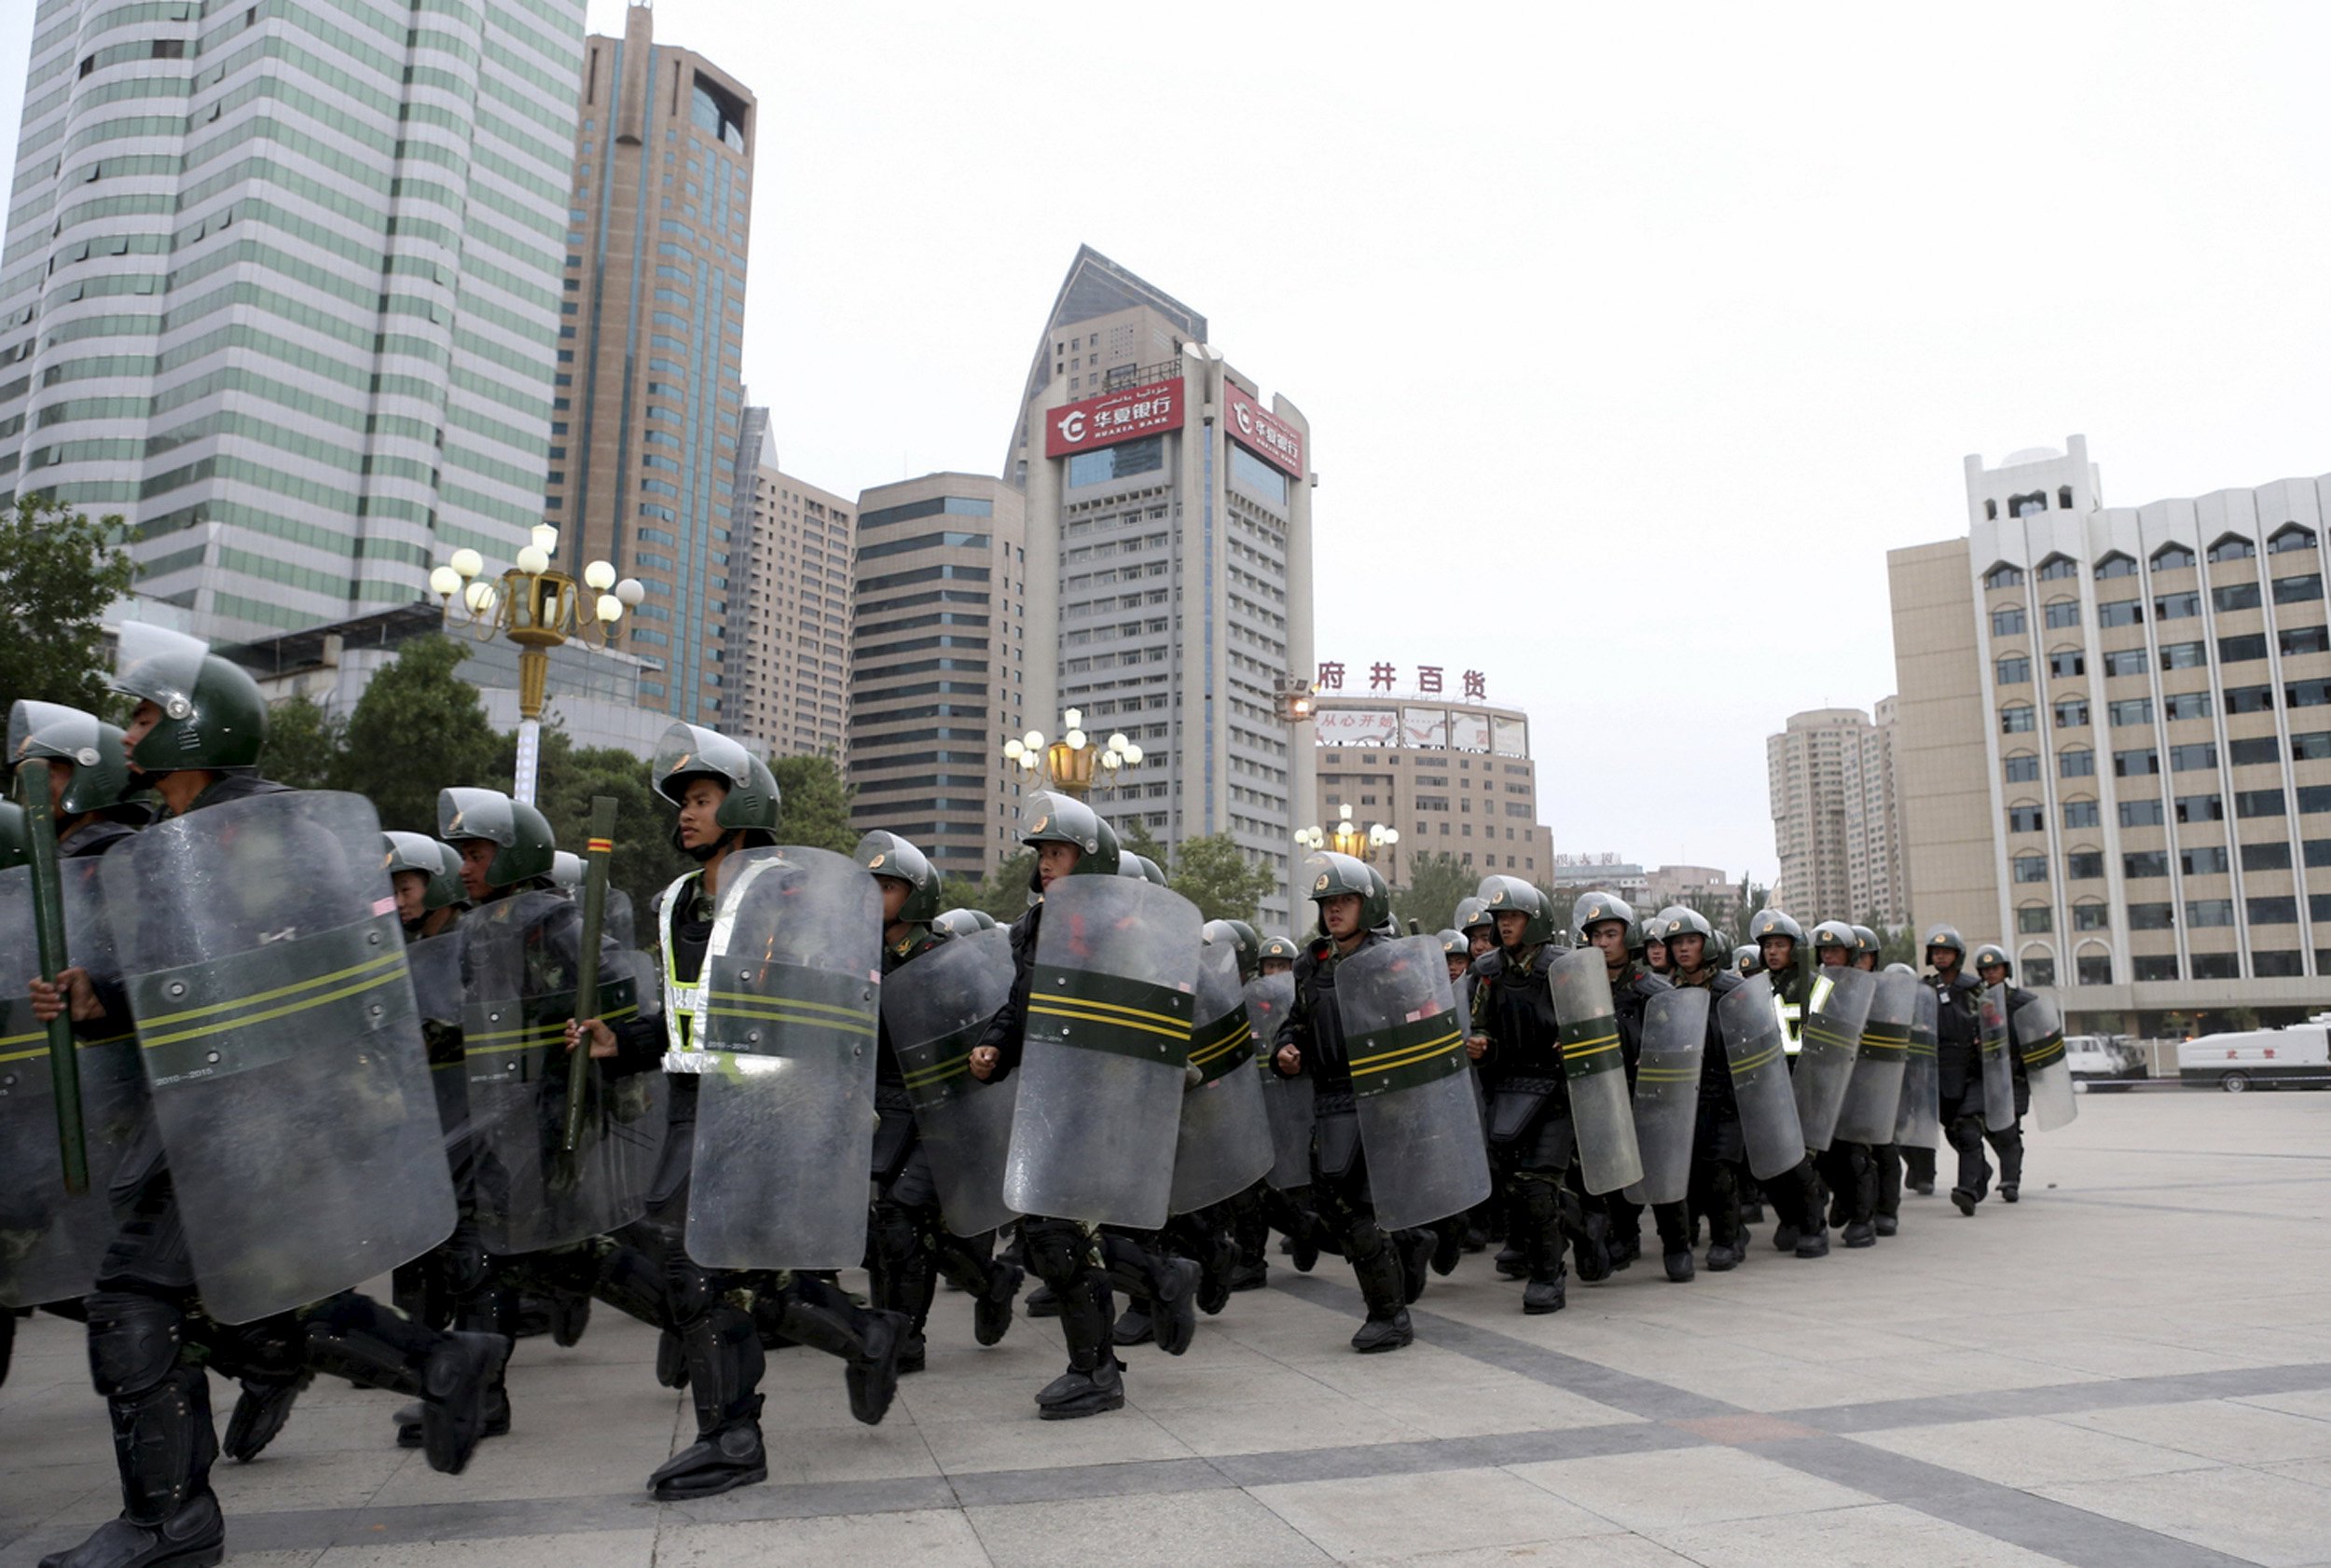 Armed paramilitary policemen run in formation during a gathering to mobilize security operations in Urumqi, Xinjiang Uighur Autonomous Region, in this June 29, 2013 file photo. To match Insight CHINA-XINJIANG/COTTON REUTERS/Stringer/Files ATTENTION EDITORS - THIS PICTURE WAS PROVIDED BY A THIRD PARTY. THIS PICTURE IS DISTRIBUTED EXACTLY AS RECEIVED BY REUTERS, AS A SERVICE TO CLIENTS. CHINA OUT. NO COMMERCIAL OR EDITORIAL SALES IN CHINA.